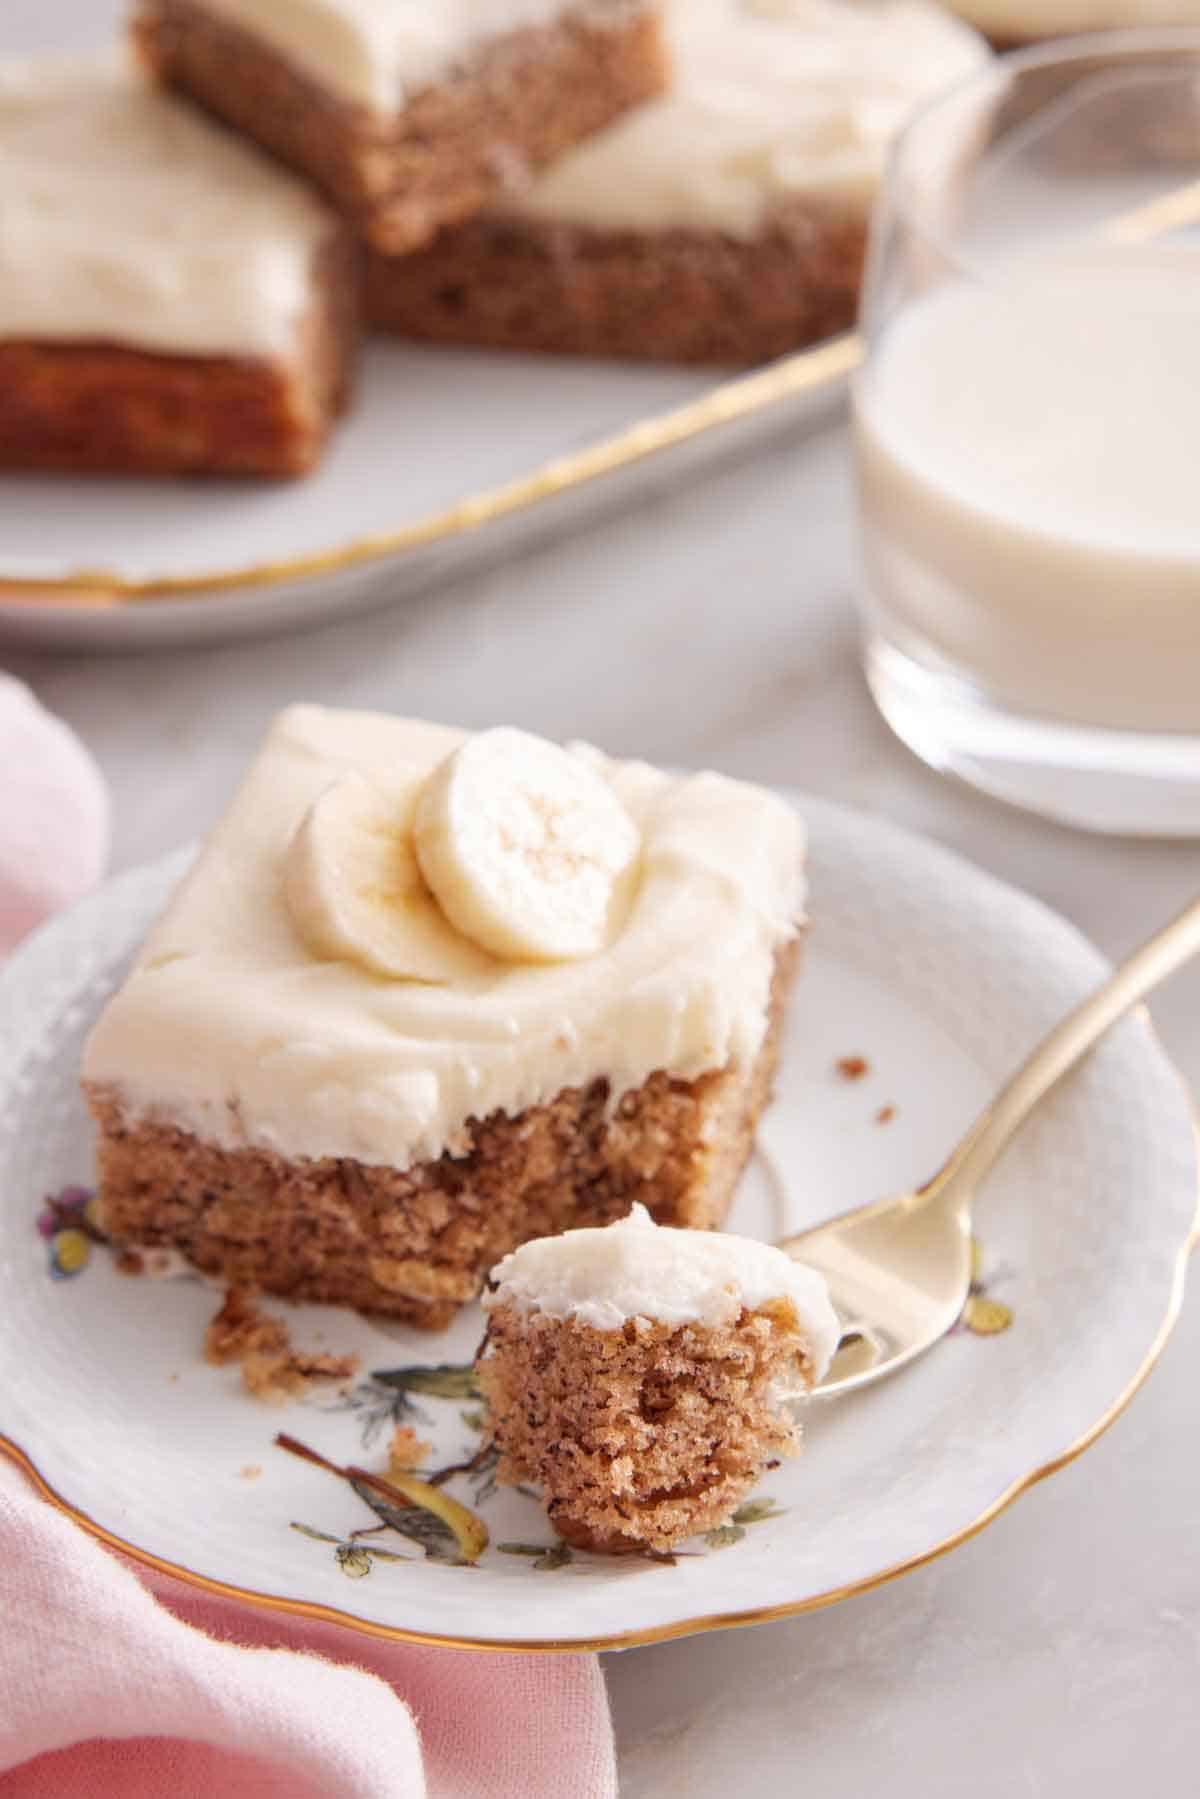 A plate with a slice of banana bar with a corner bite on a fork. Glass of milk and more bars in the back.